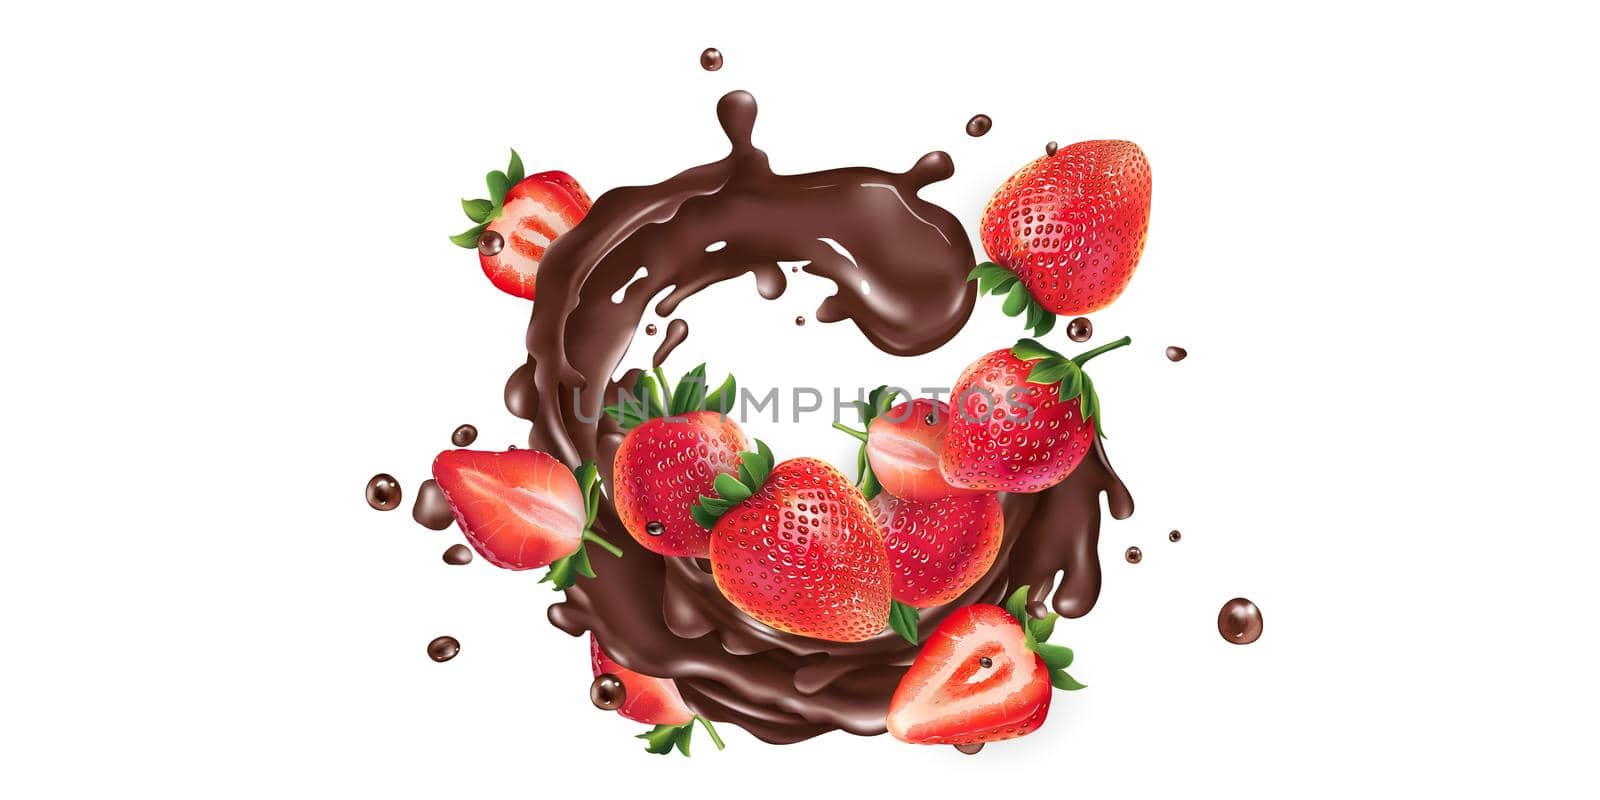 Whole and sliced strawberries in a chocolate splash on a white background. Realistic style illustration.